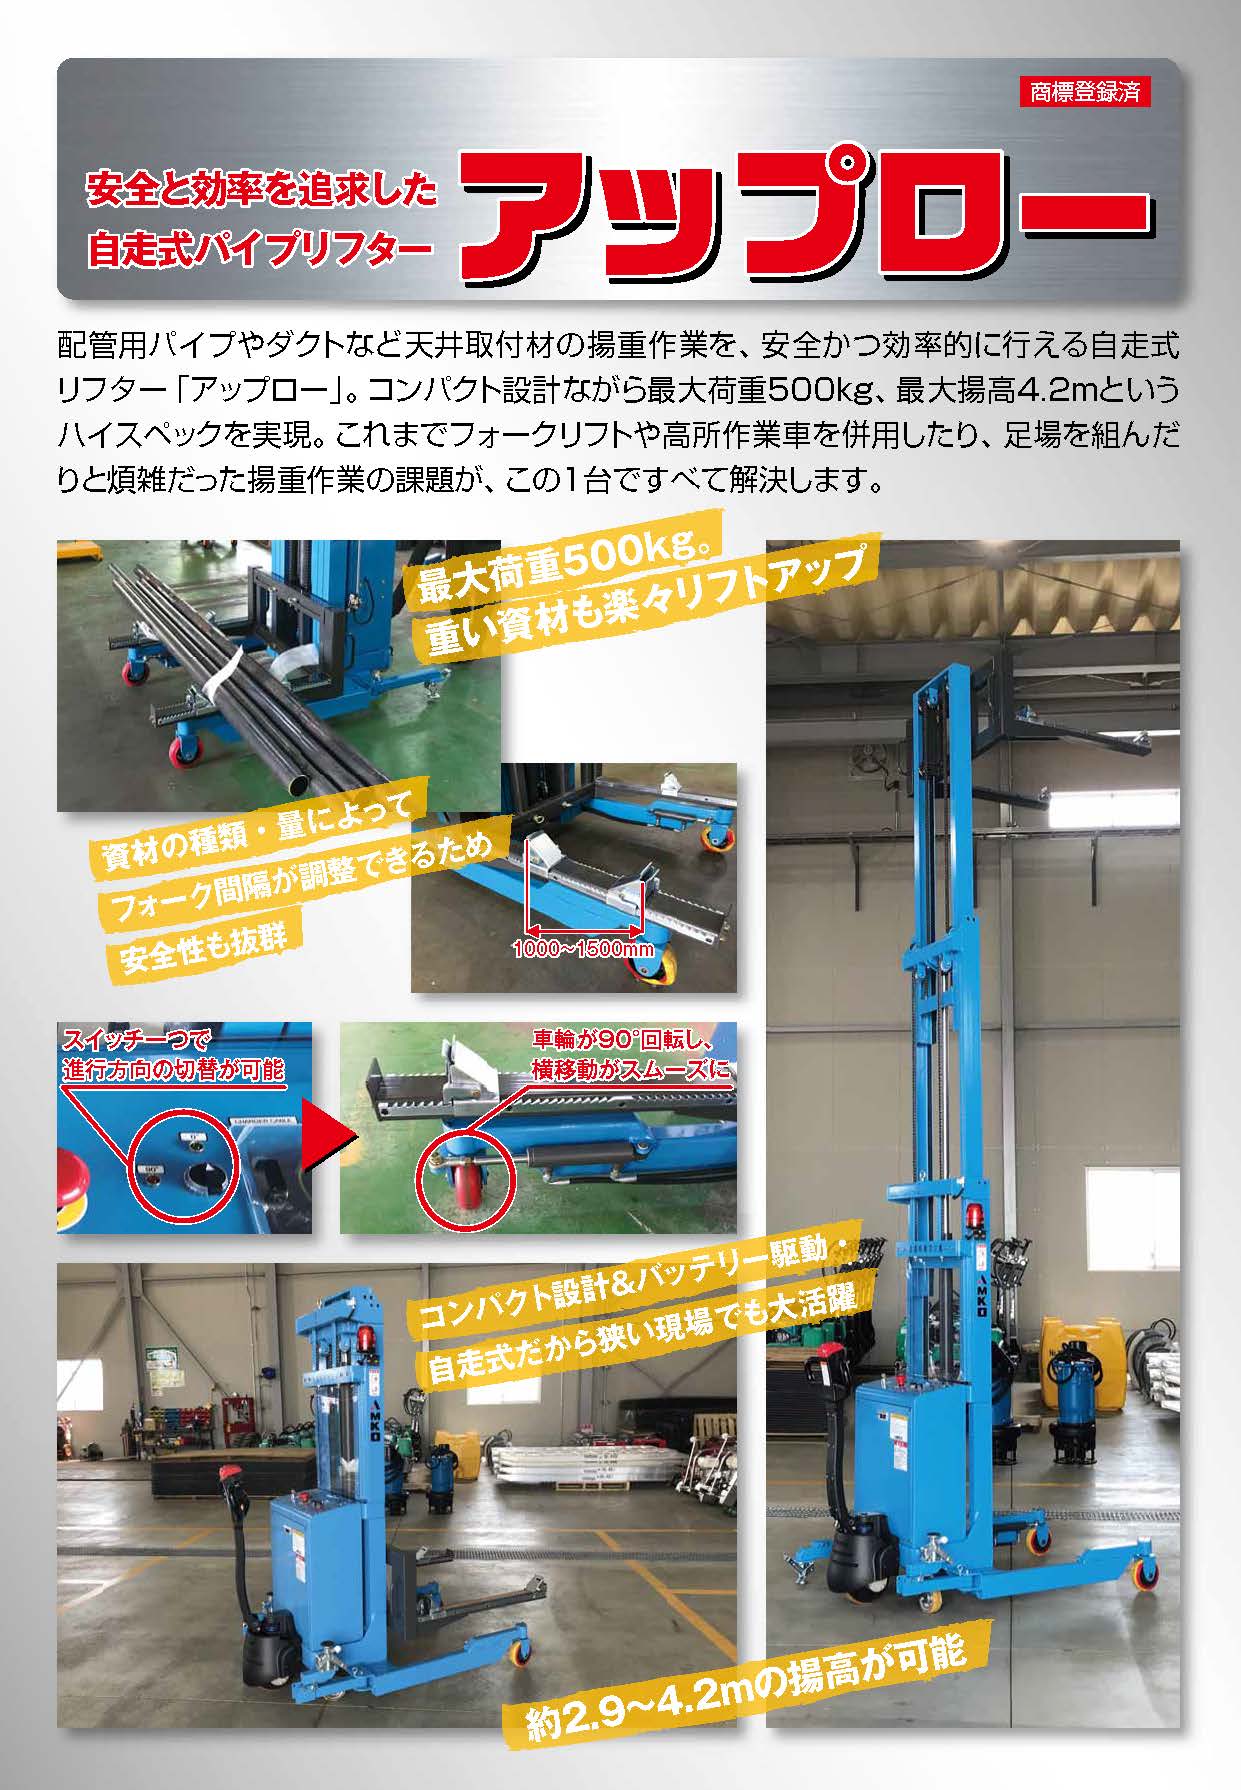  uplow electric stacker Page 1